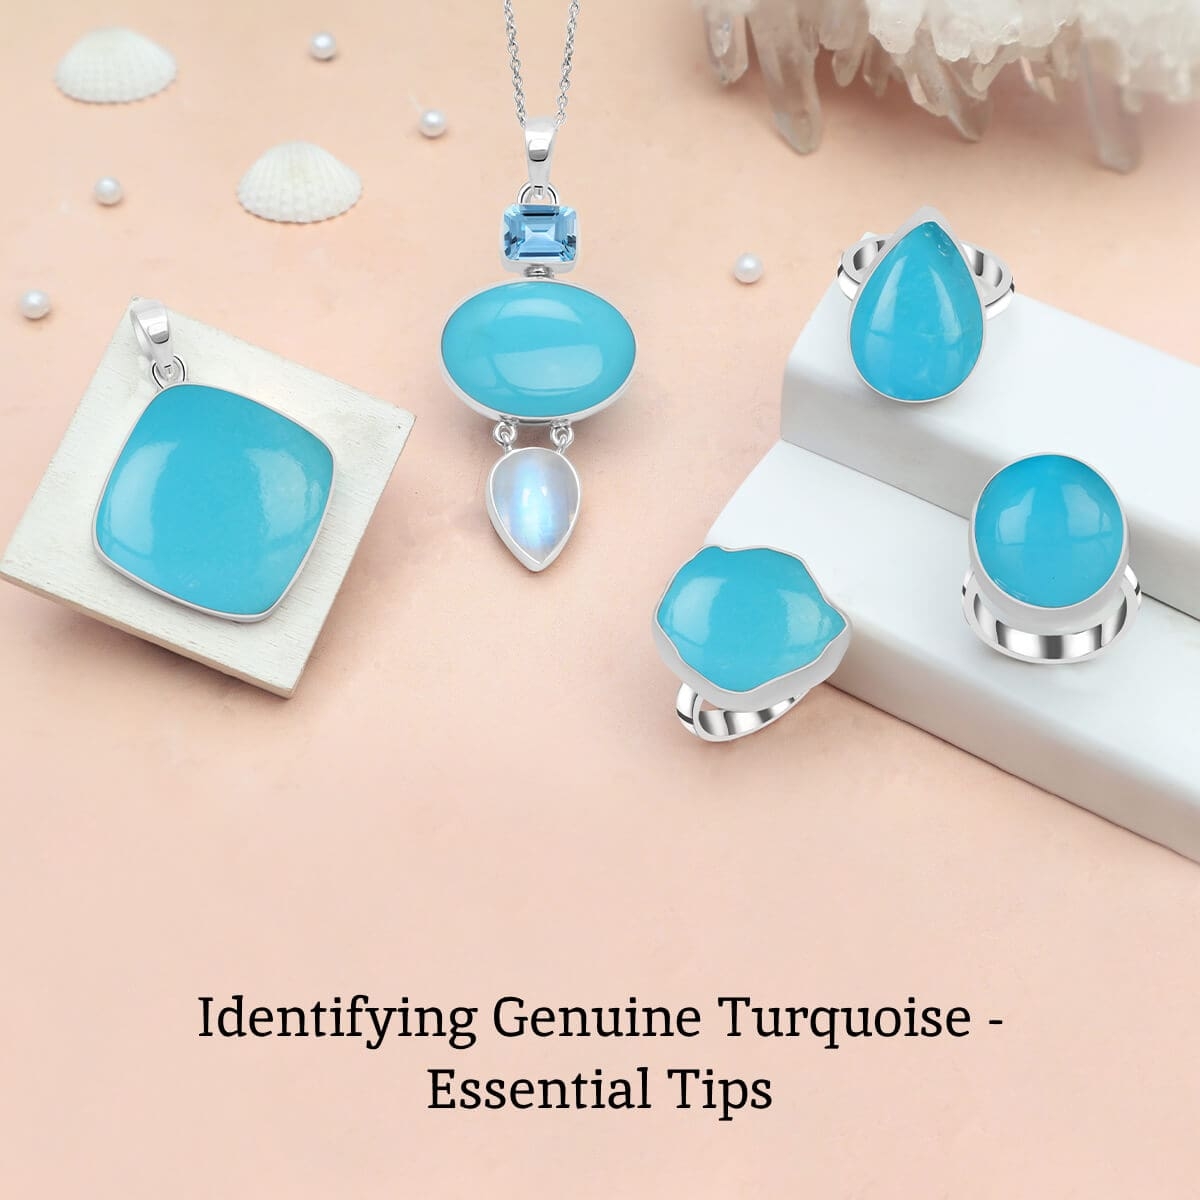 How to Tell if Turquoise is Real